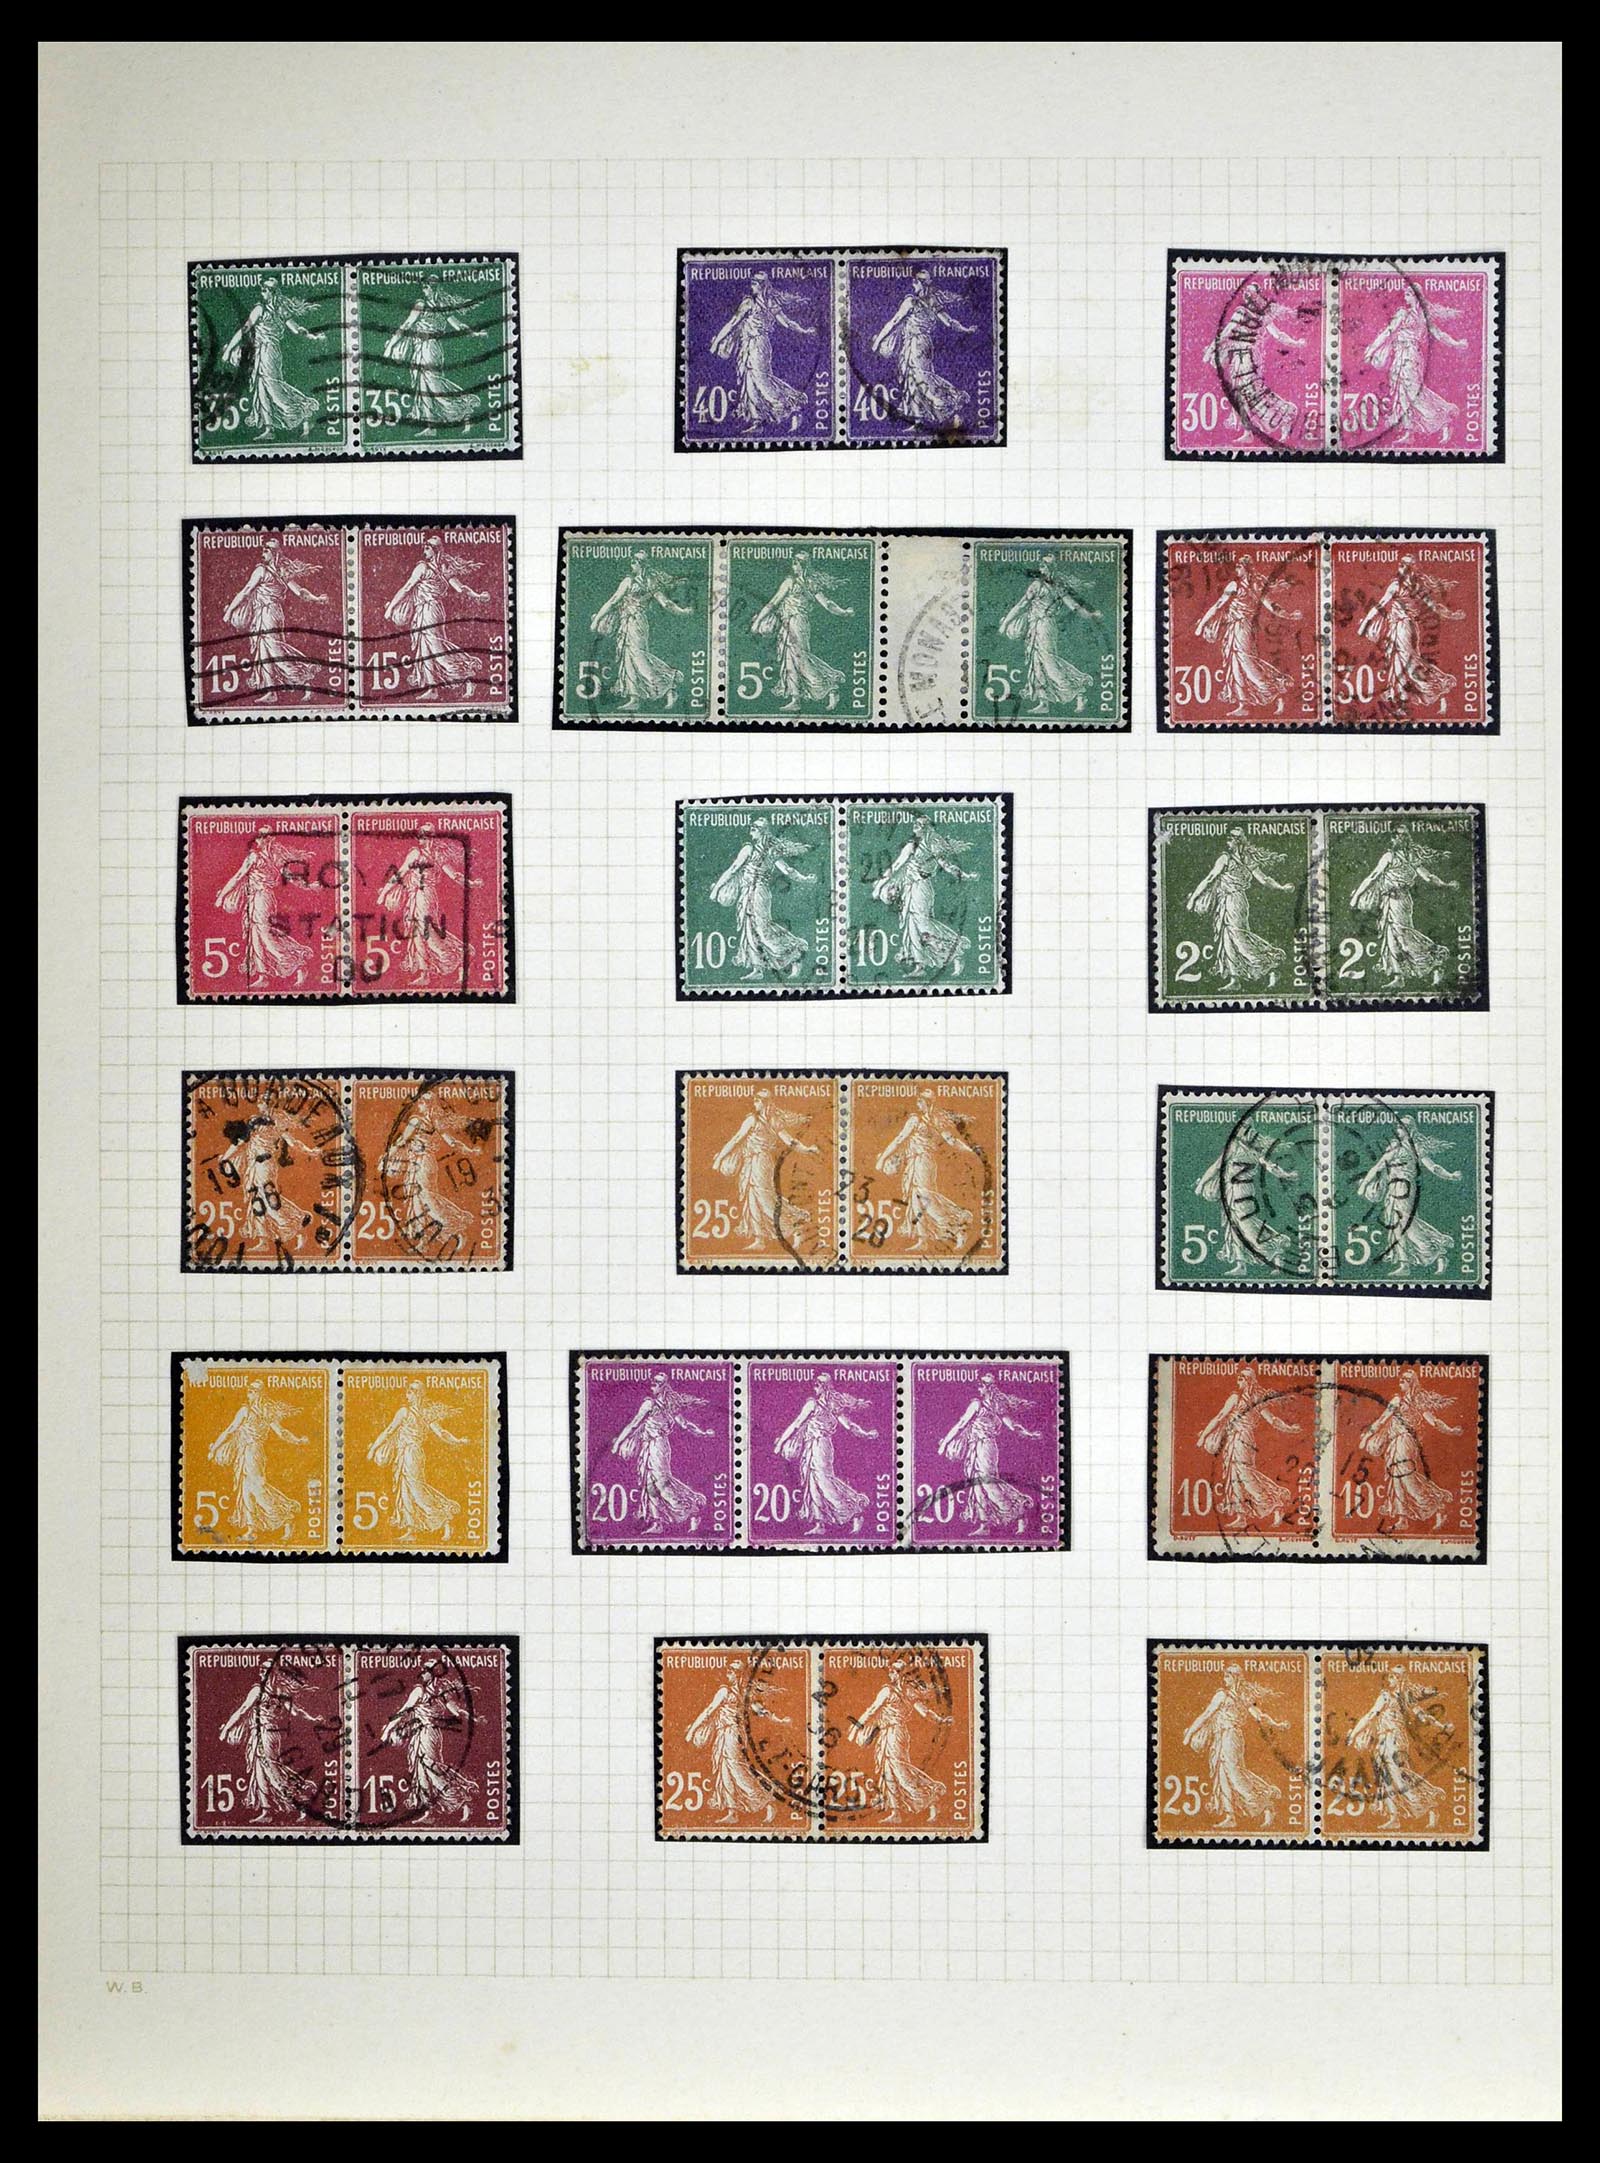 39329 0060 - Stamp collection 39329 France Semeuse.